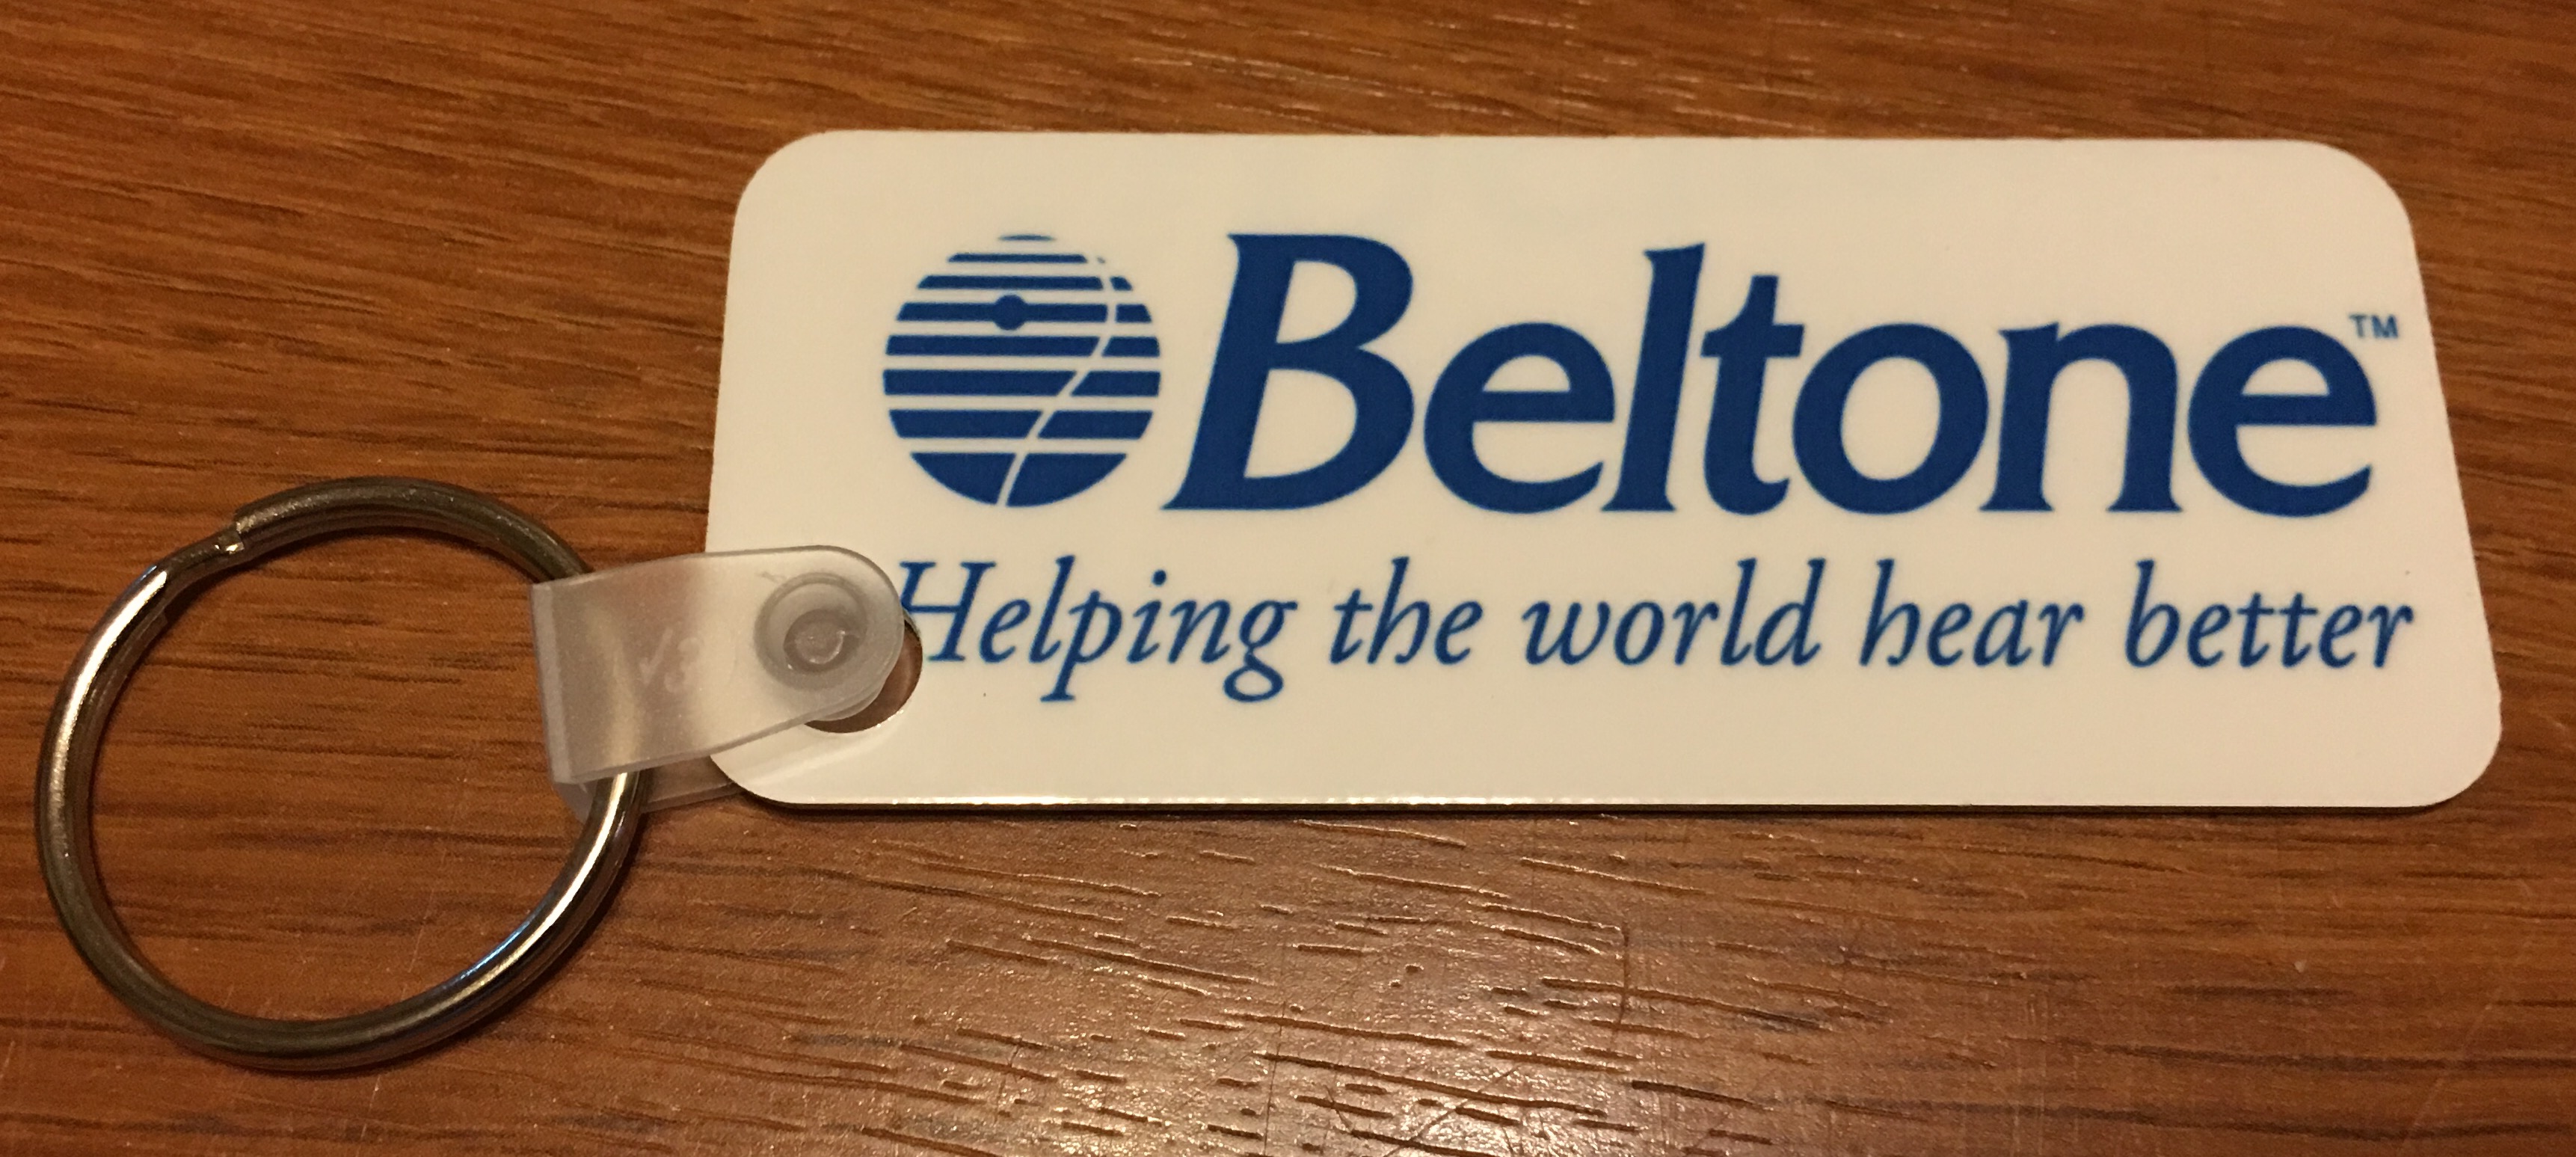 Key Tag made with sublimation printing